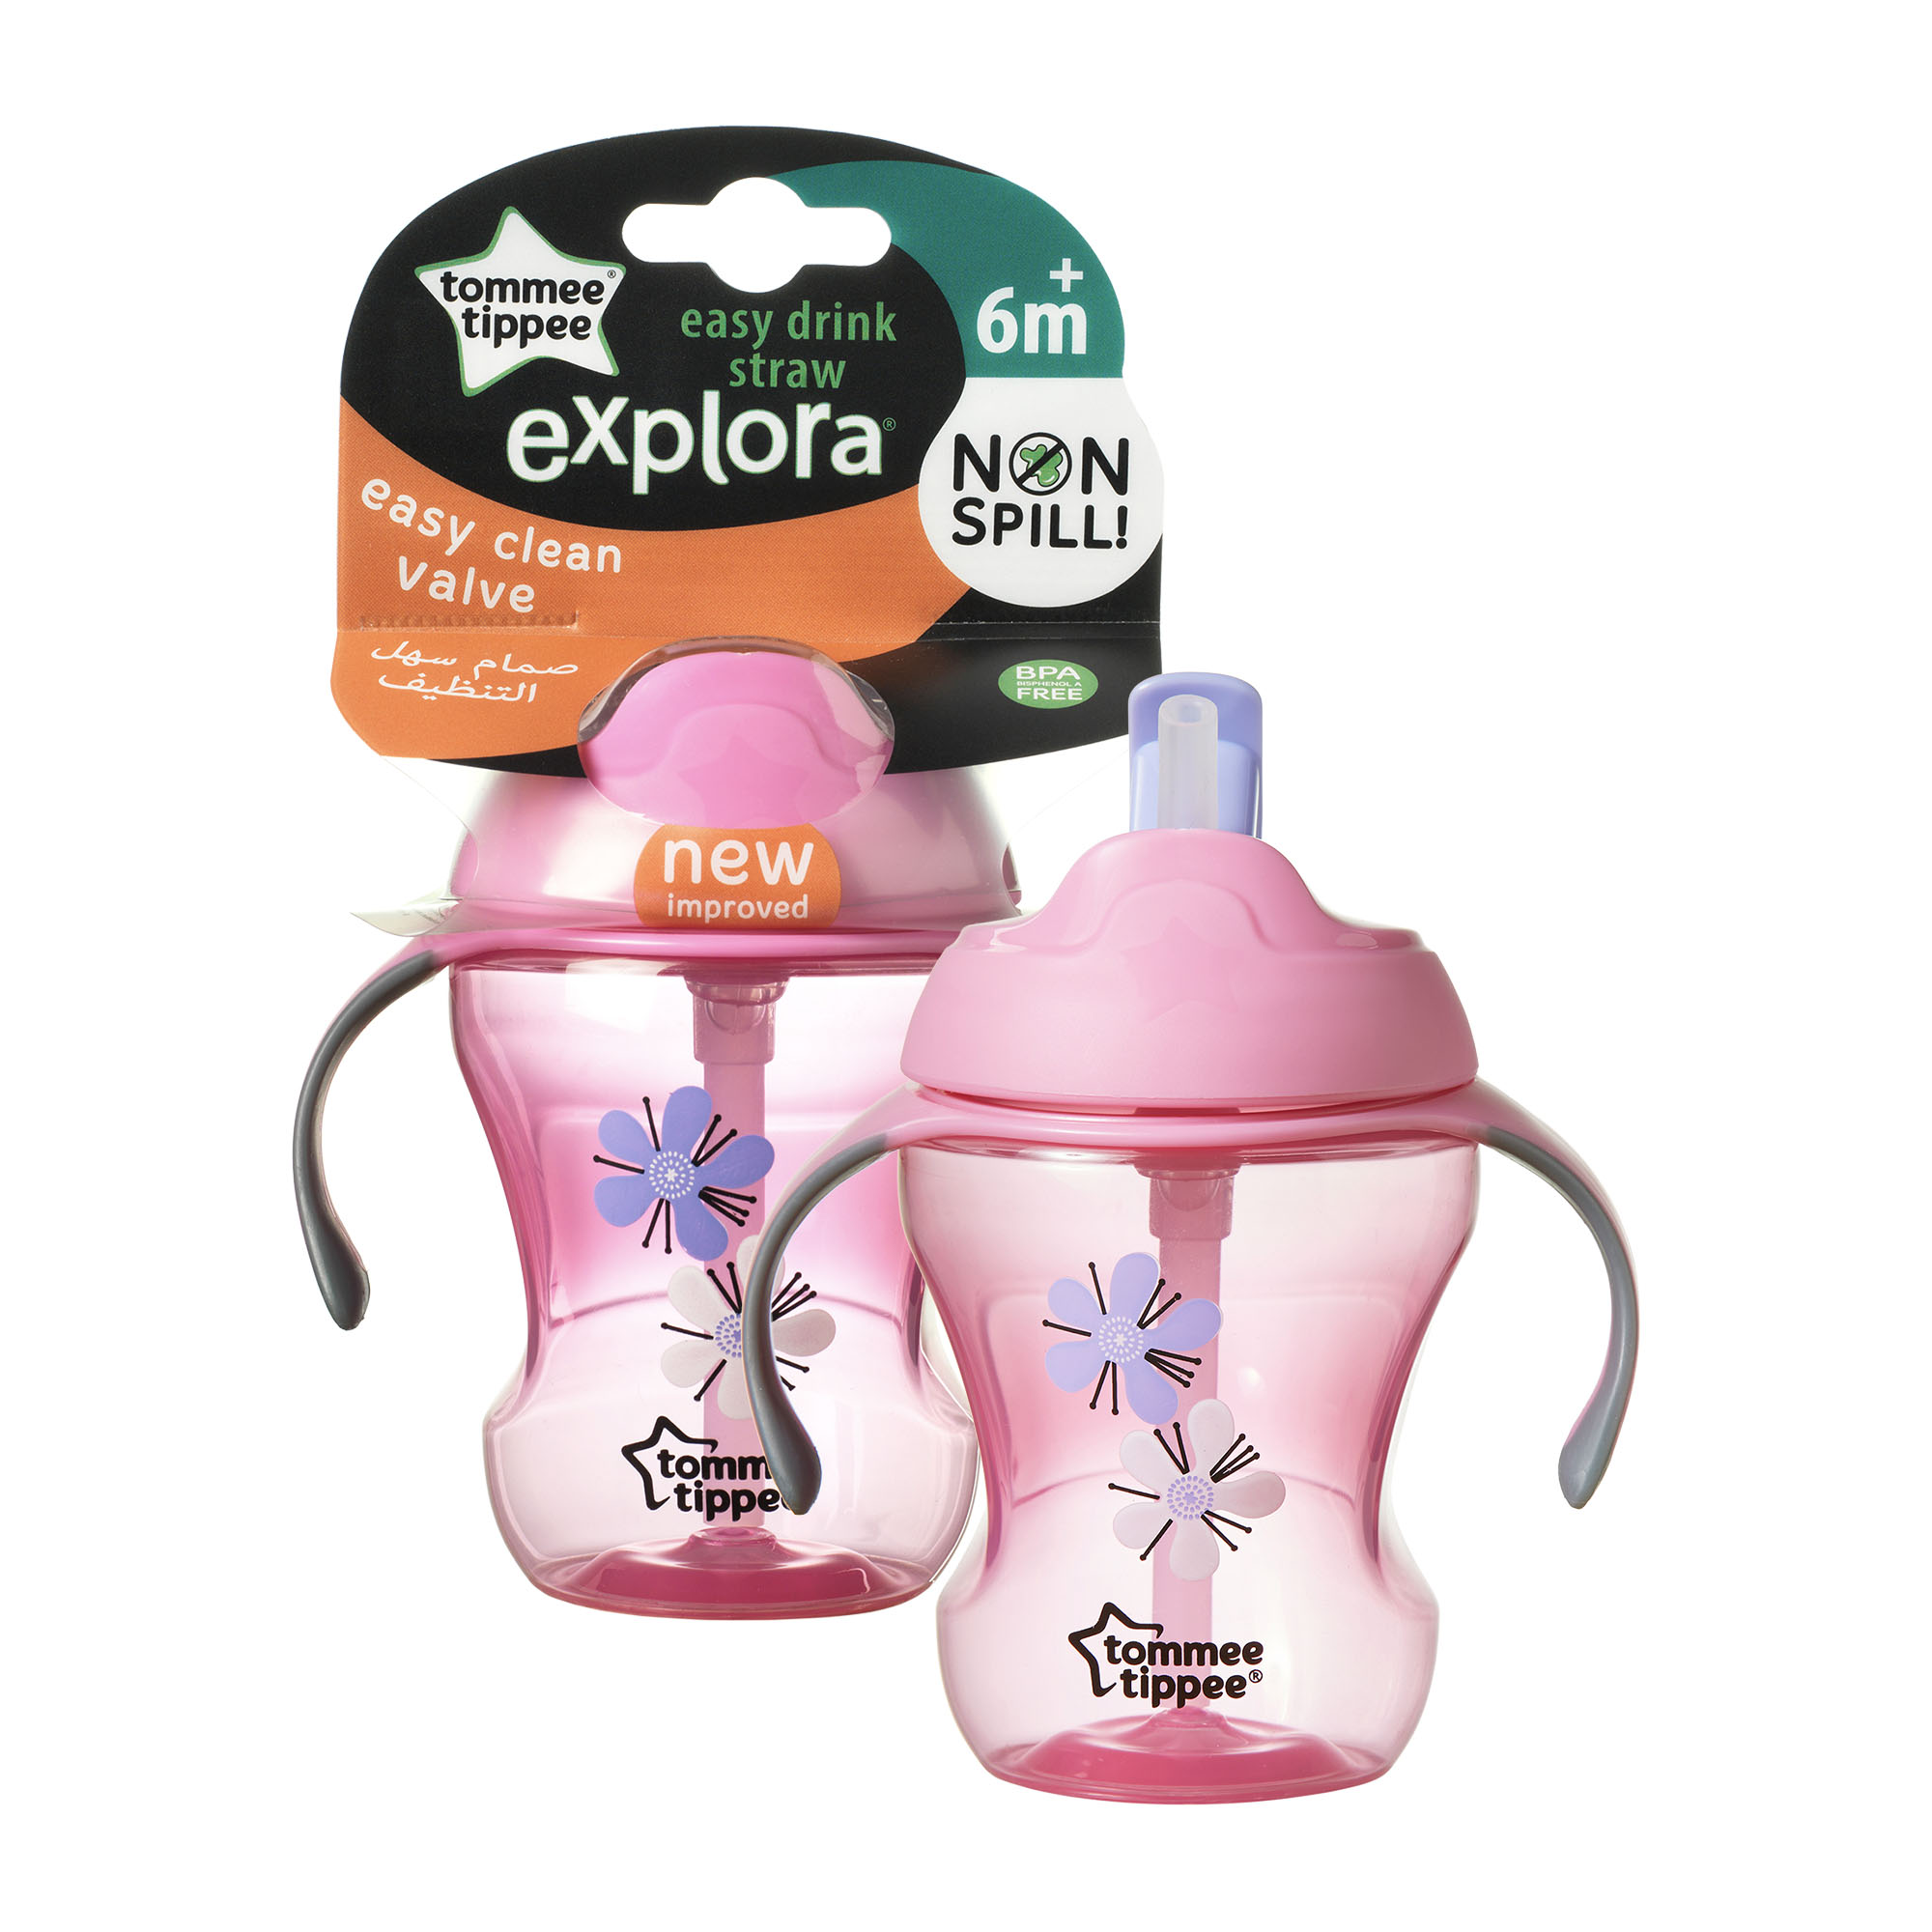 Cana Easy Drink cu pai Explora, Tommee Tippee, 230ml,Floricele Roz